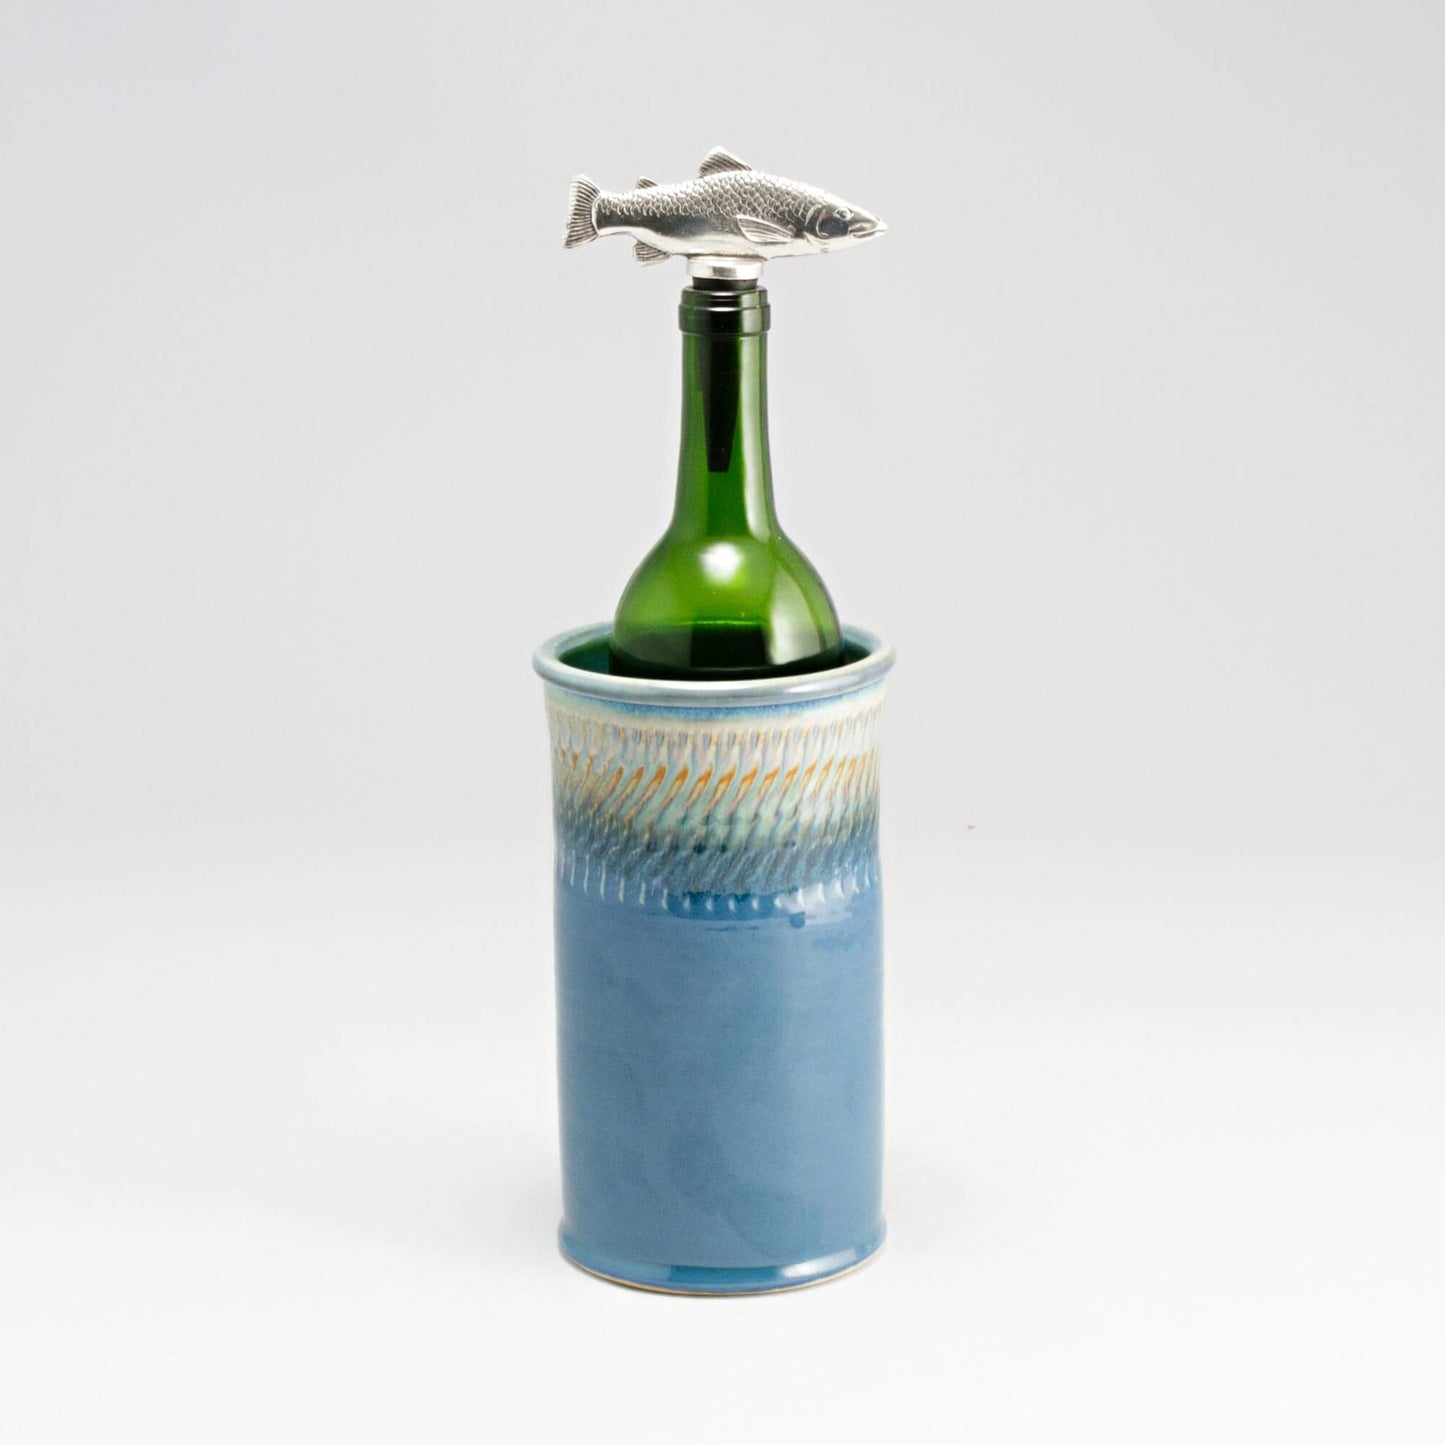 Handmade Pottery Wine Chiller in Blue Oribe pattern made by Georgetown Pottery in Maine